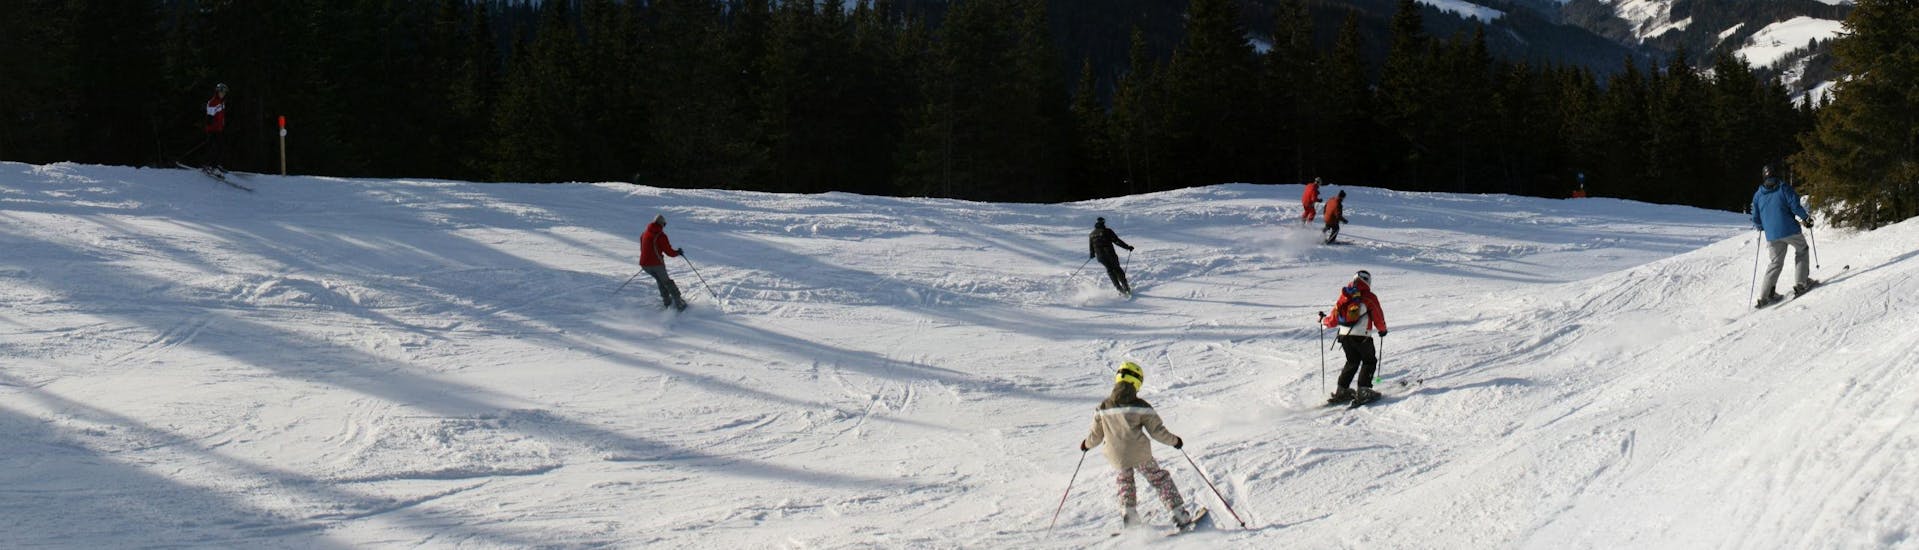 Several skiers are enjoying themselves on one of the ski slopes in the ski resort Stuhleck, where local ski schools offer different types of ski lessons.